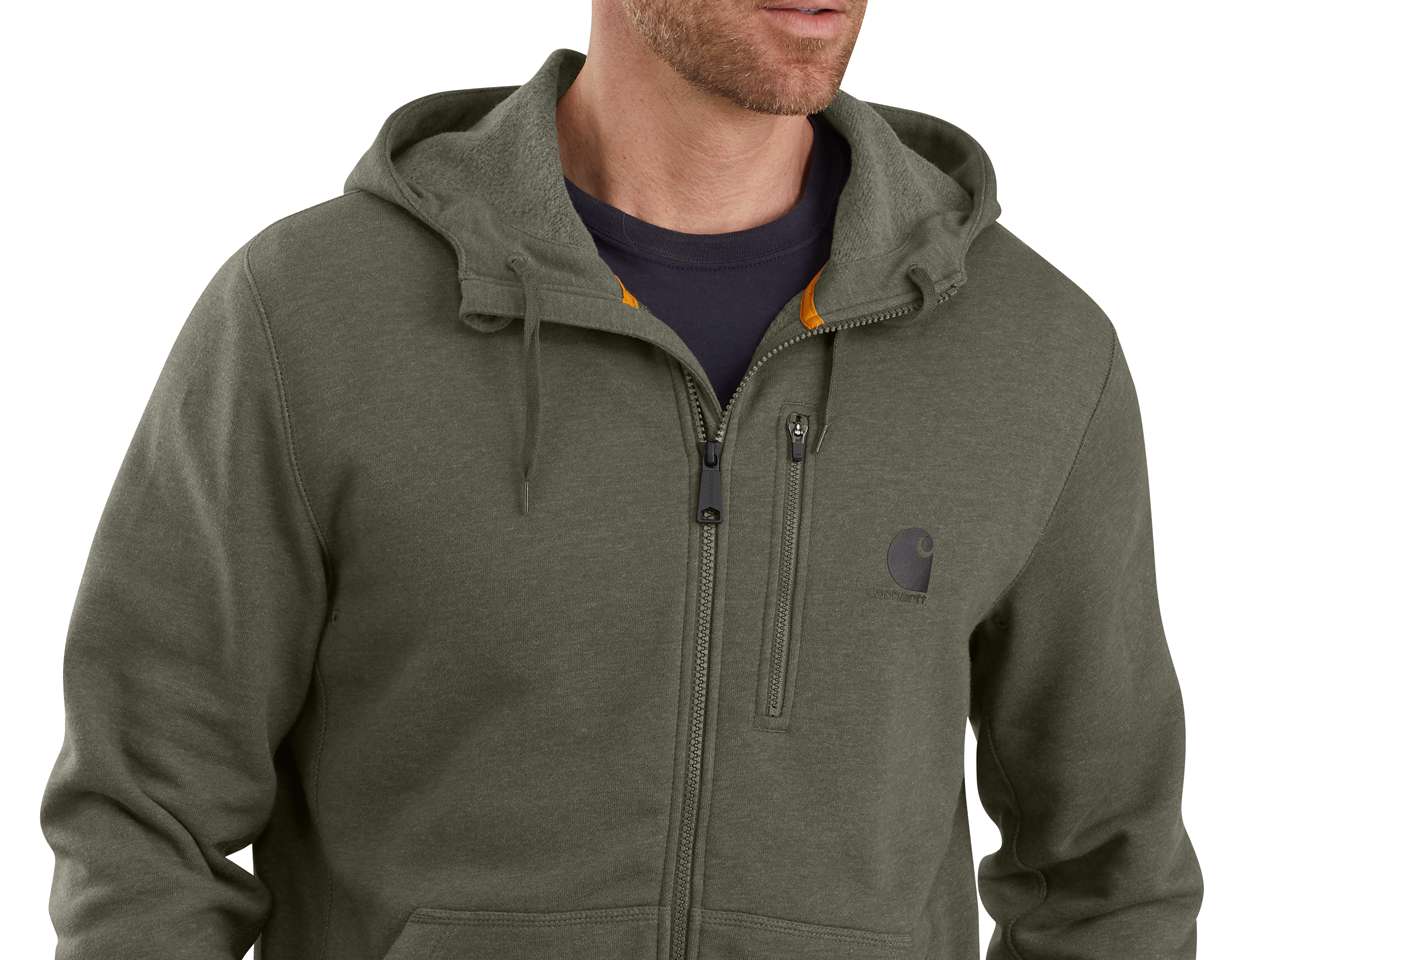  Full-zip front with 3-piece pullover hood and drawcord closure